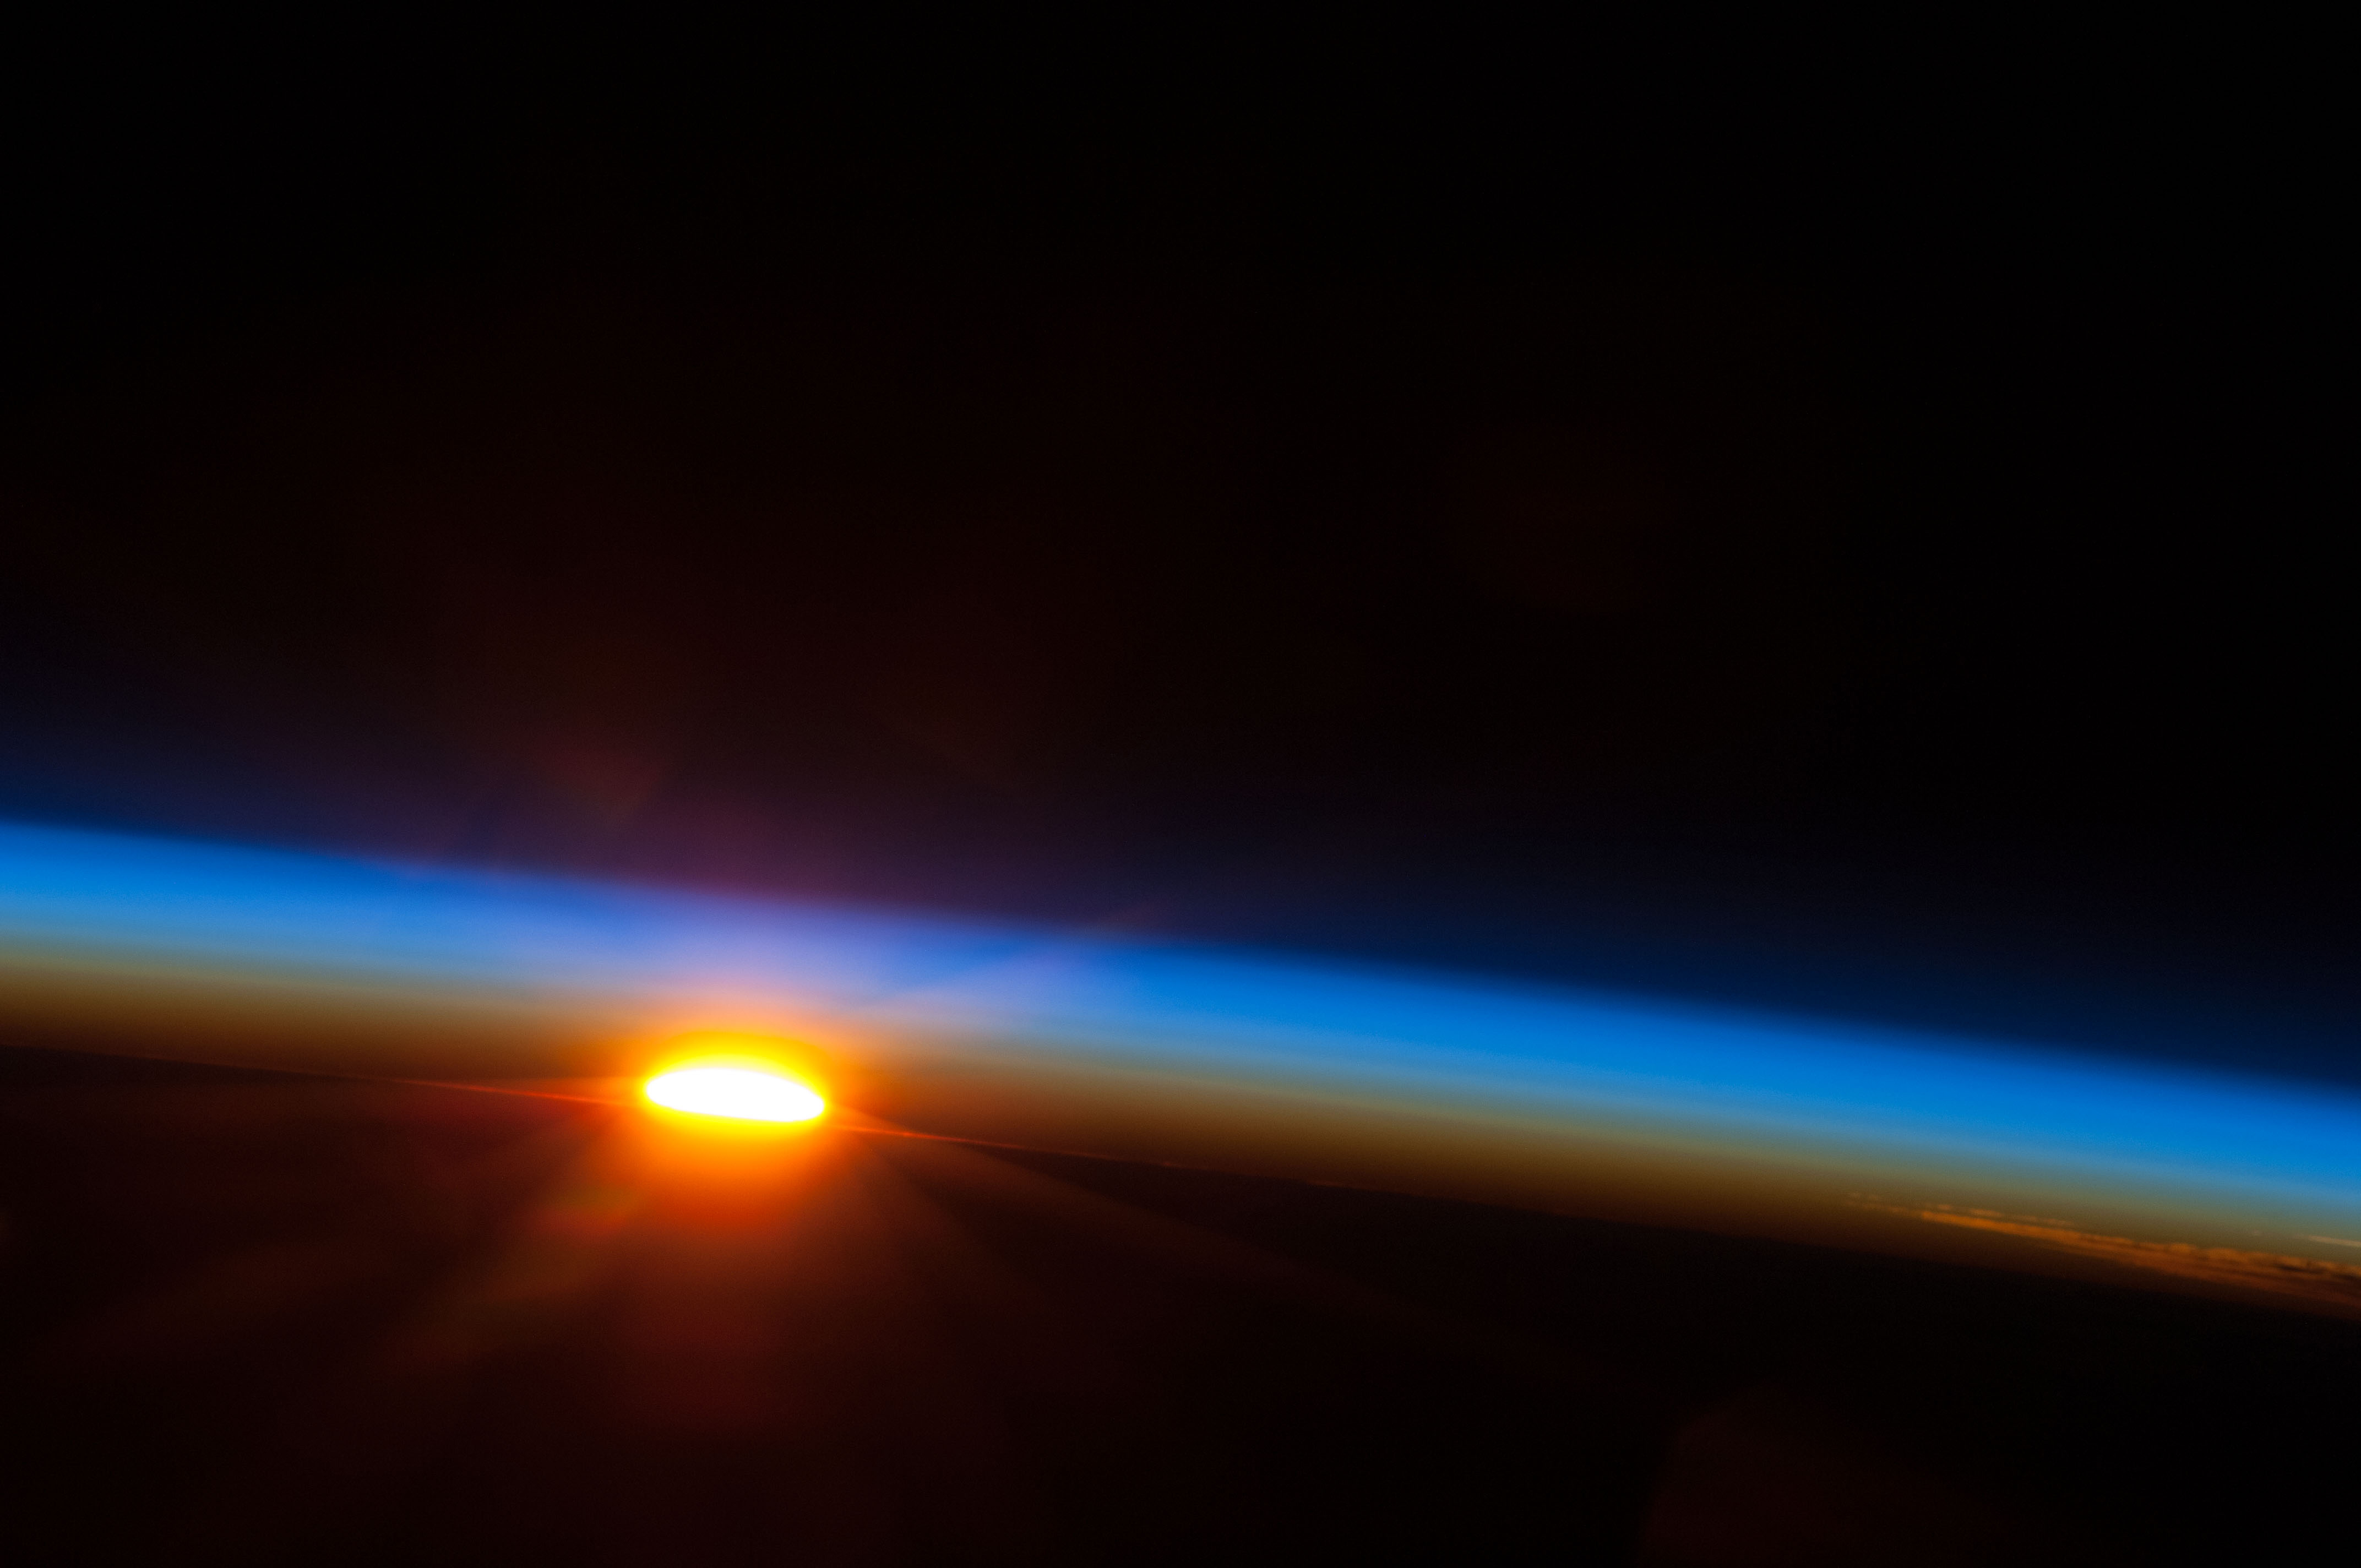 Sunrise Over the South Pacific Ocean